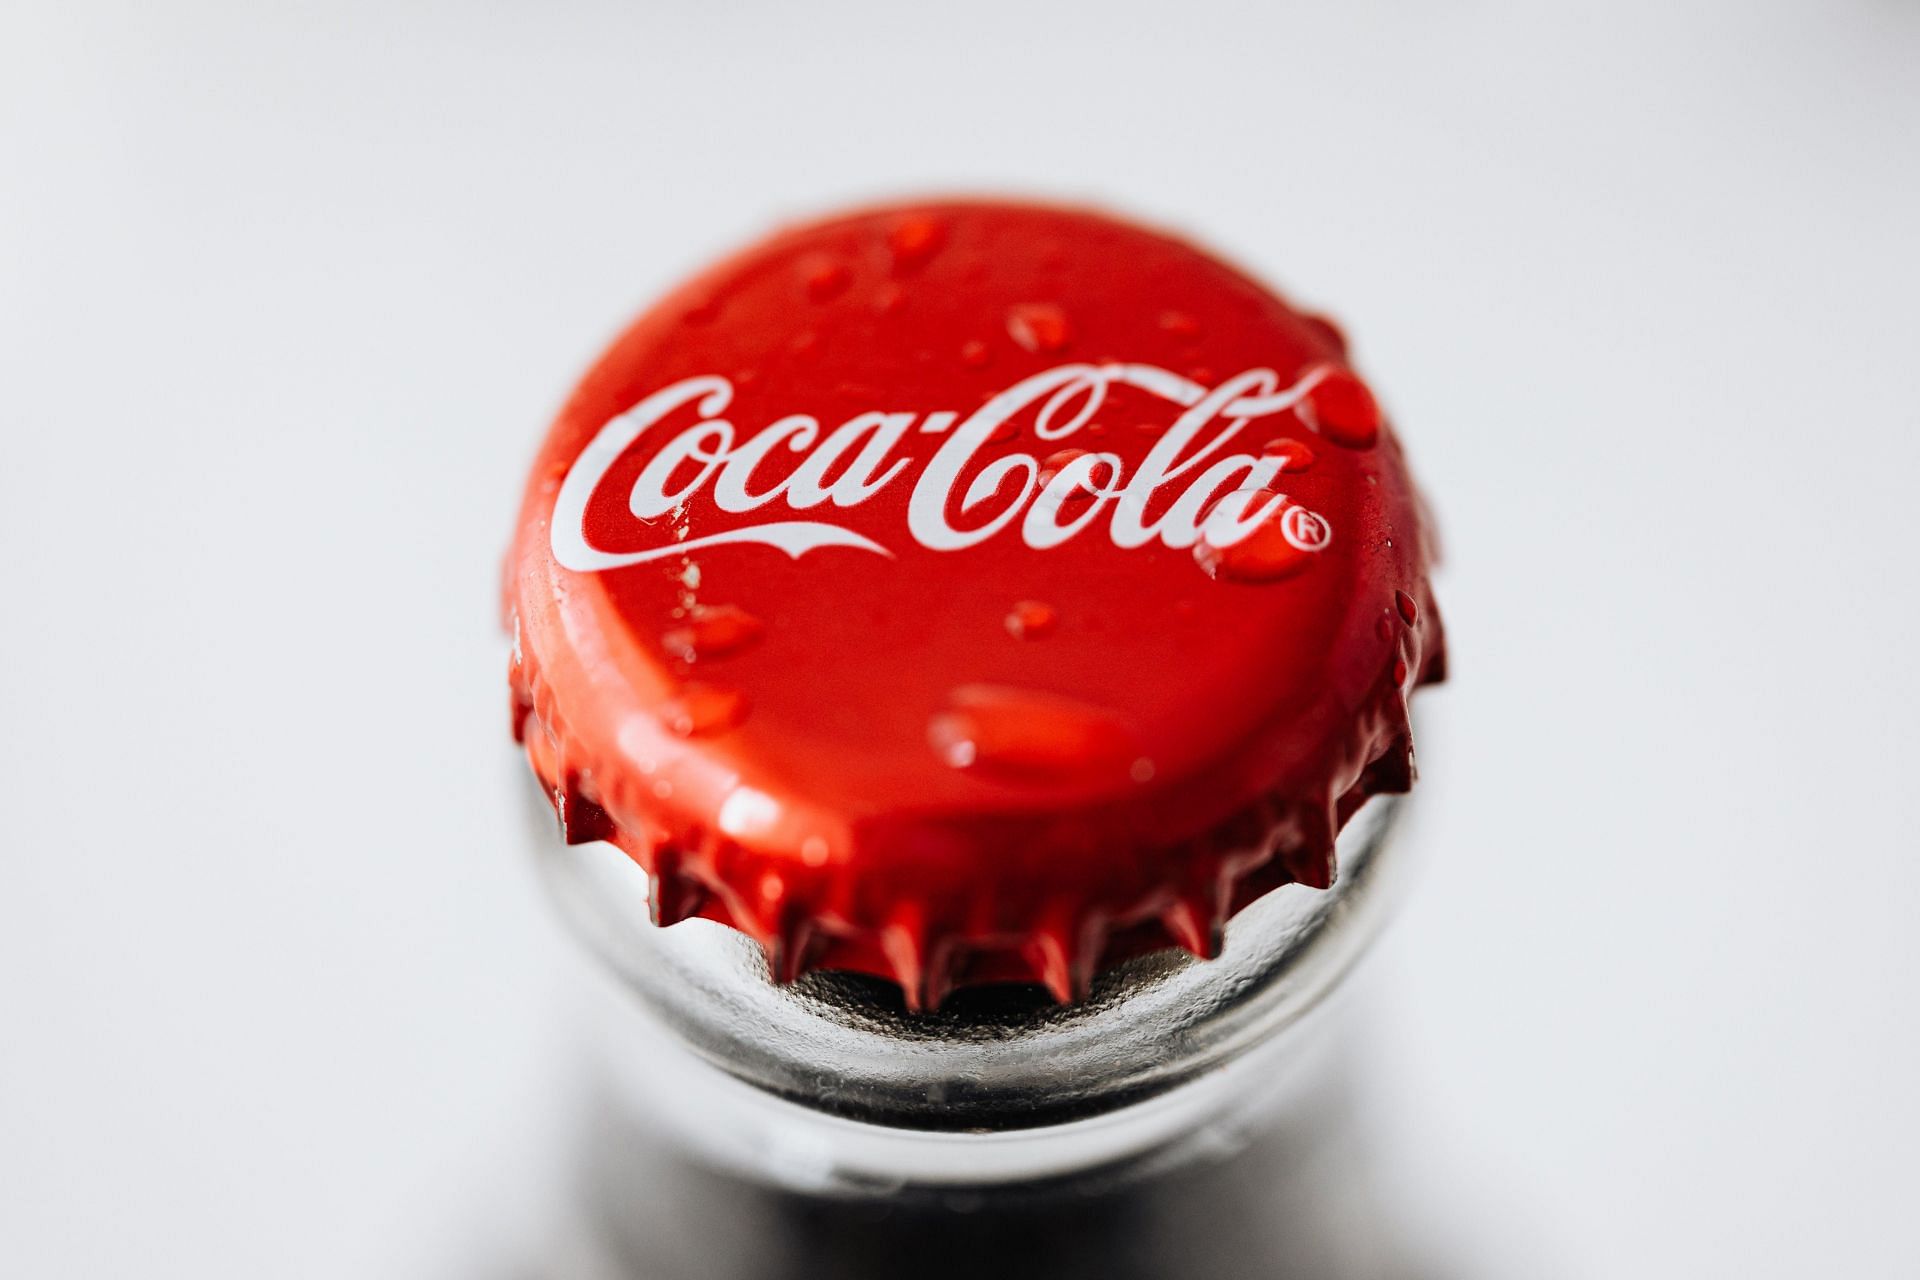 Is it safe to drink coke zero while pregnant (image sourced via Pexels / Photo by Karolina)